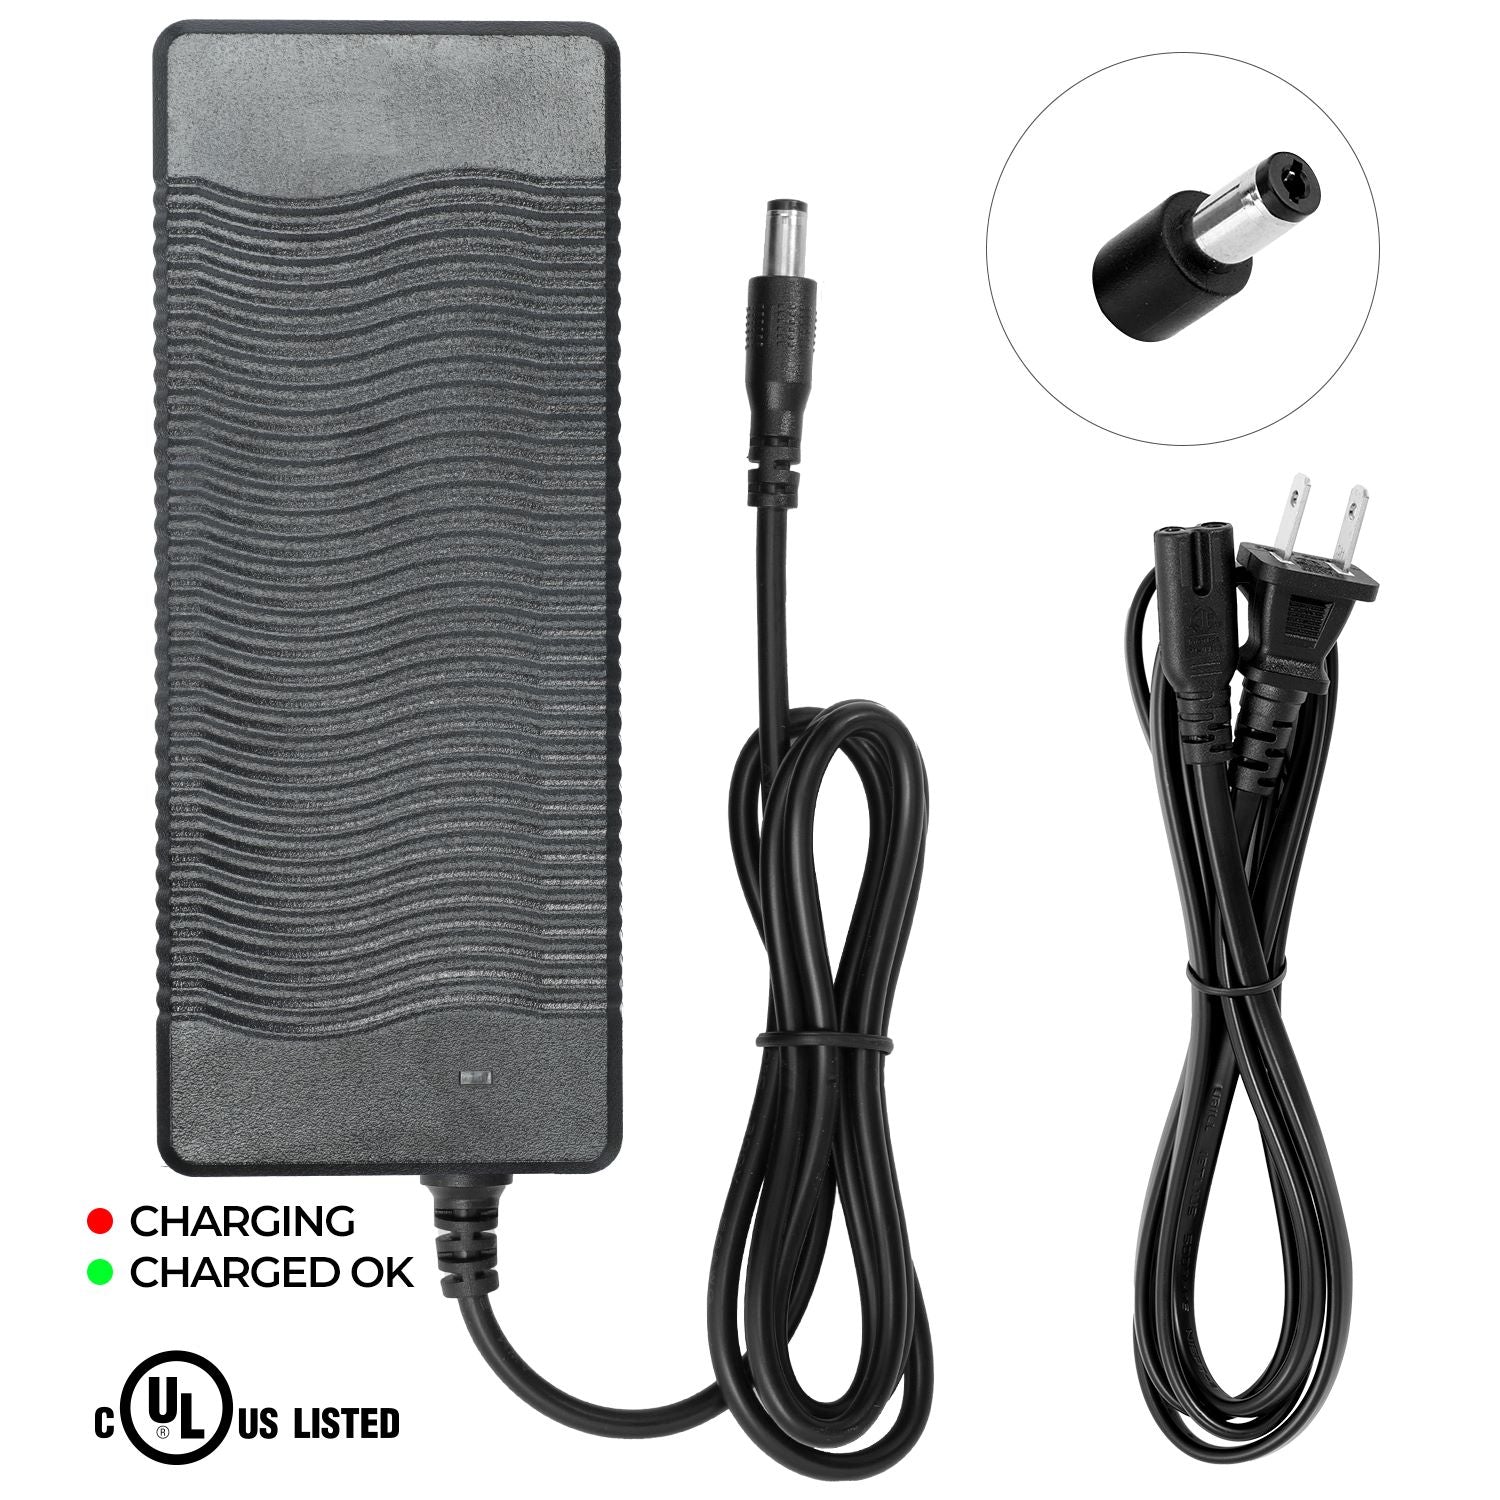 Charger for Ariel Rider eBikes